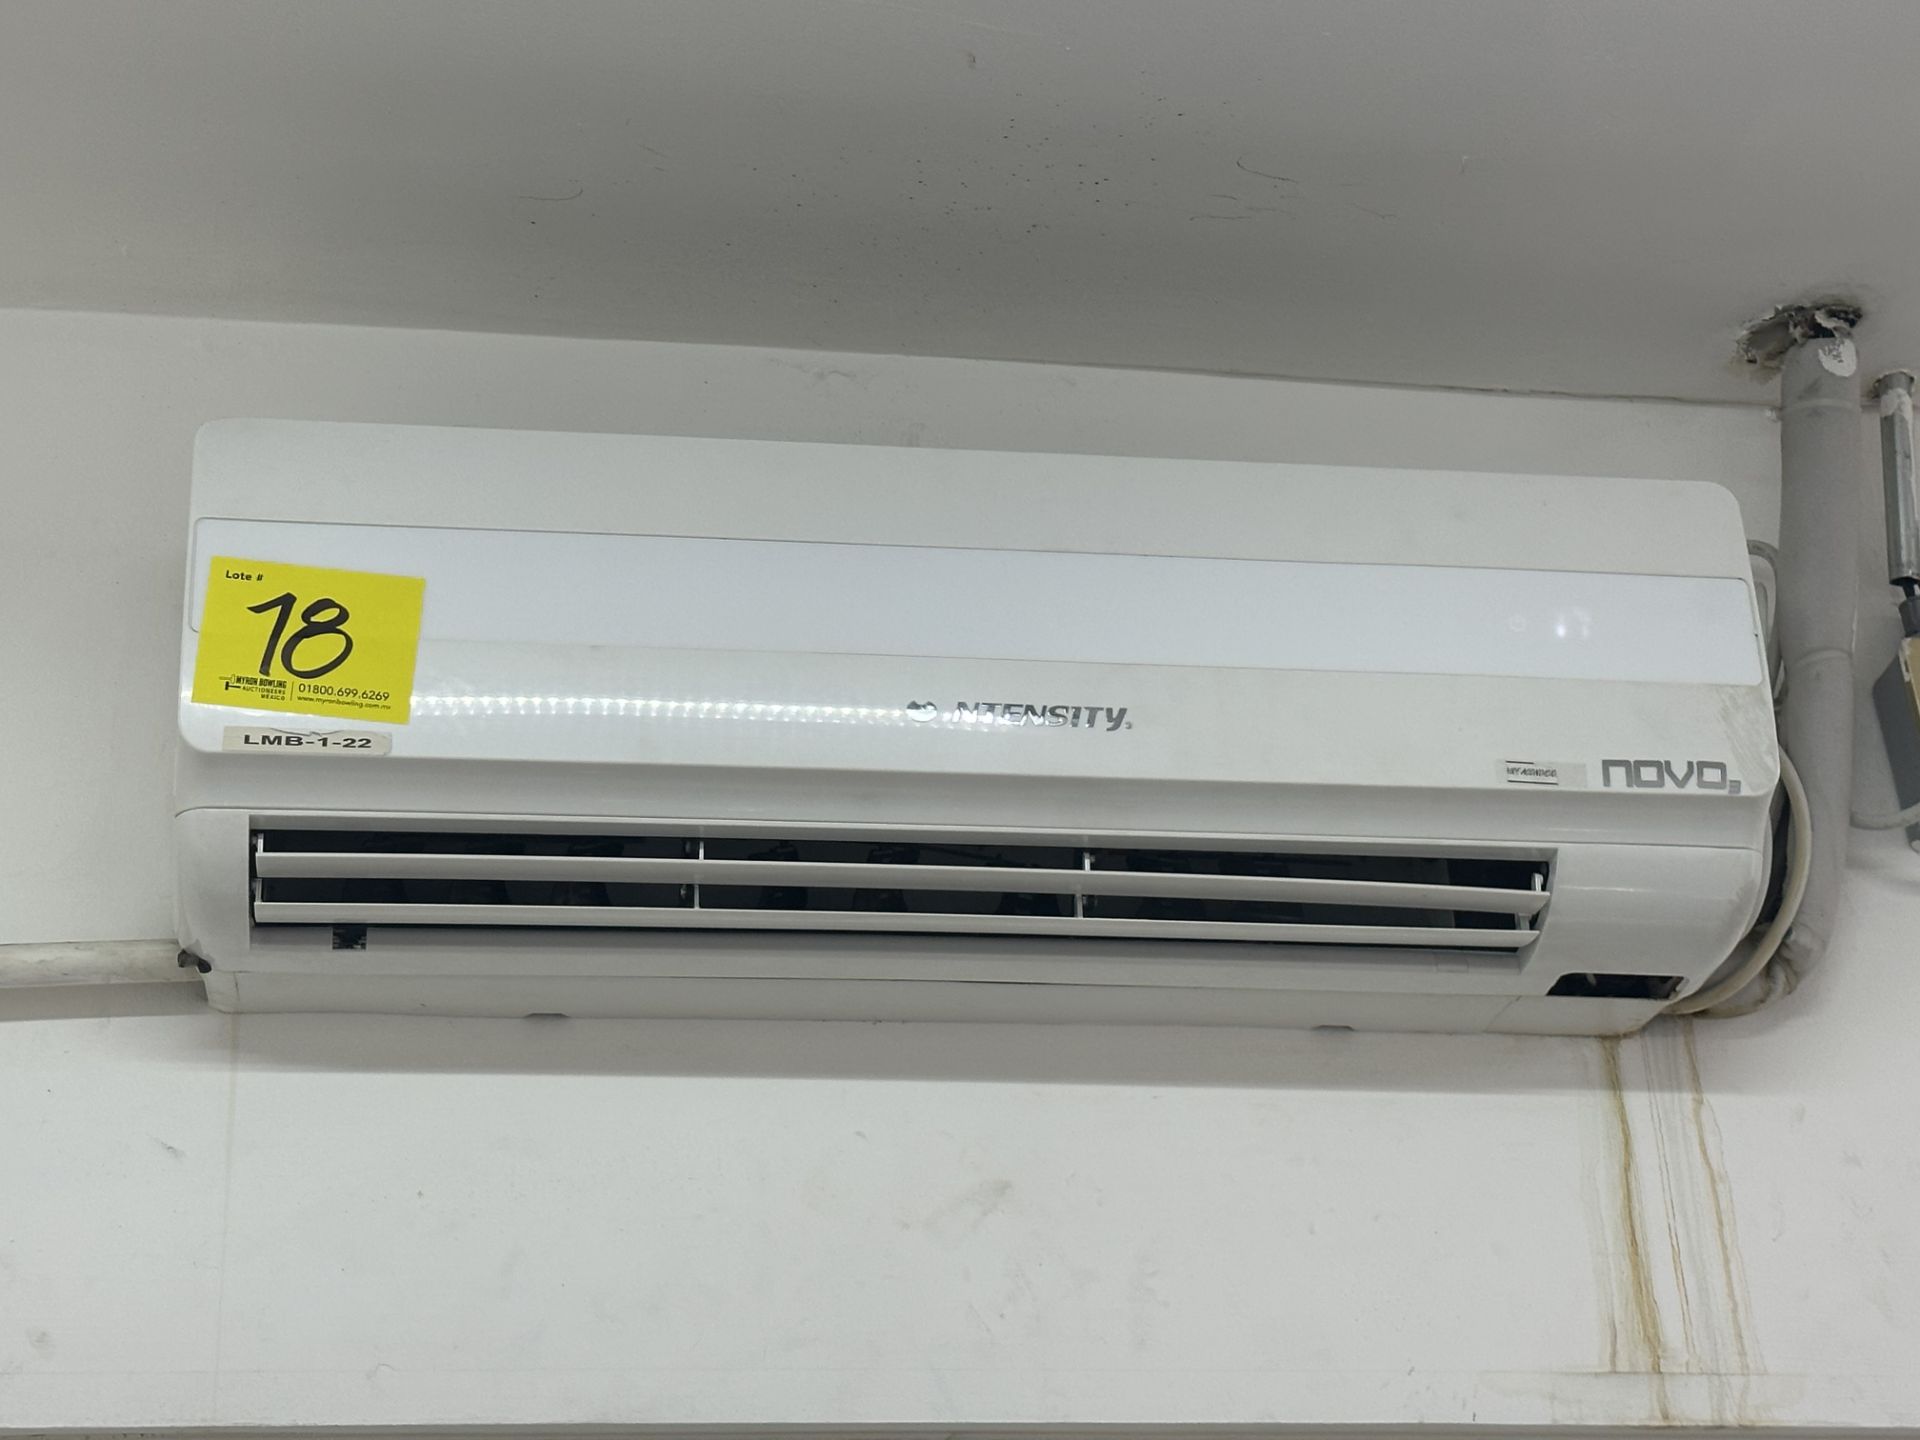 Lot of 3 minisplit air conditioners: 1 Carrier Air Conditioner, Model ND, ND Series, includes conde - Image 13 of 15